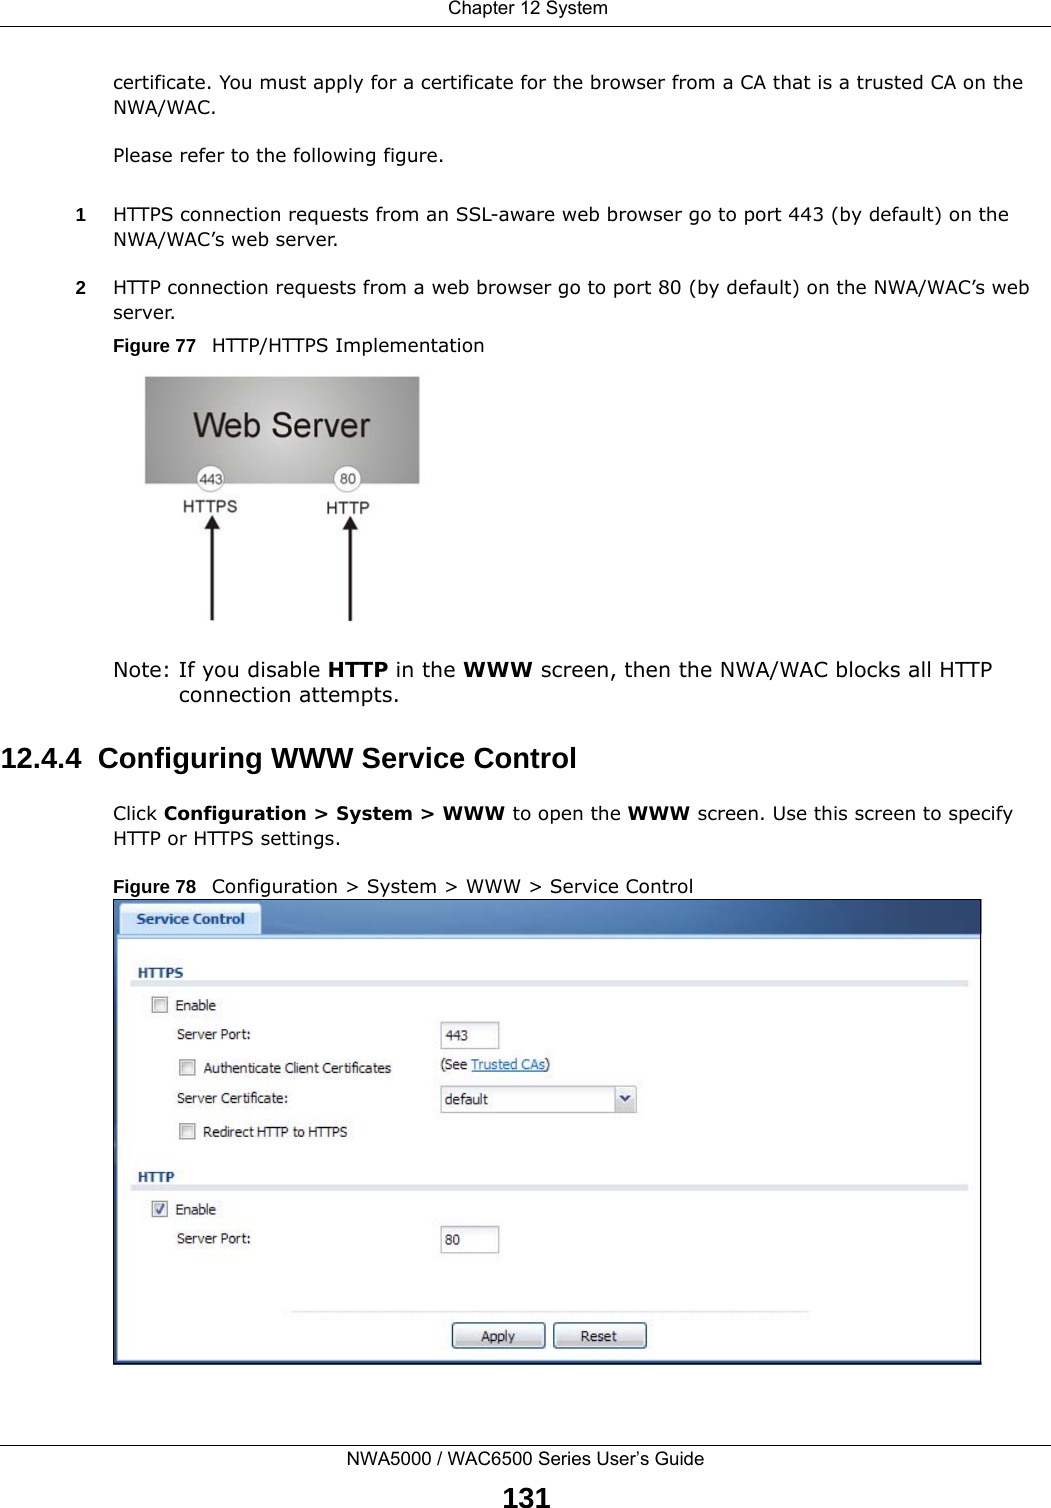  Chapter 12 SystemNWA5000 / WAC6500 Series User’s Guide131certificate. You must apply for a certificate for the browser from a CA that is a trusted CA on the NWA/WAC.Please refer to the following figure.1HTTPS connection requests from an SSL-aware web browser go to port 443 (by default) on the NWA/WAC’s web server.2HTTP connection requests from a web browser go to port 80 (by default) on the NWA/WAC’s web server.Figure 77   HTTP/HTTPS ImplementationNote: If you disable HTTP in the WWW screen, then the NWA/WAC blocks all HTTP connection attempts.12.4.4  Configuring WWW Service ControlClick Configuration &gt; System &gt; WWW to open the WWW screen. Use this screen to specify HTTP or HTTPS settings. Figure 78   Configuration &gt; System &gt; WWW &gt; Service Control